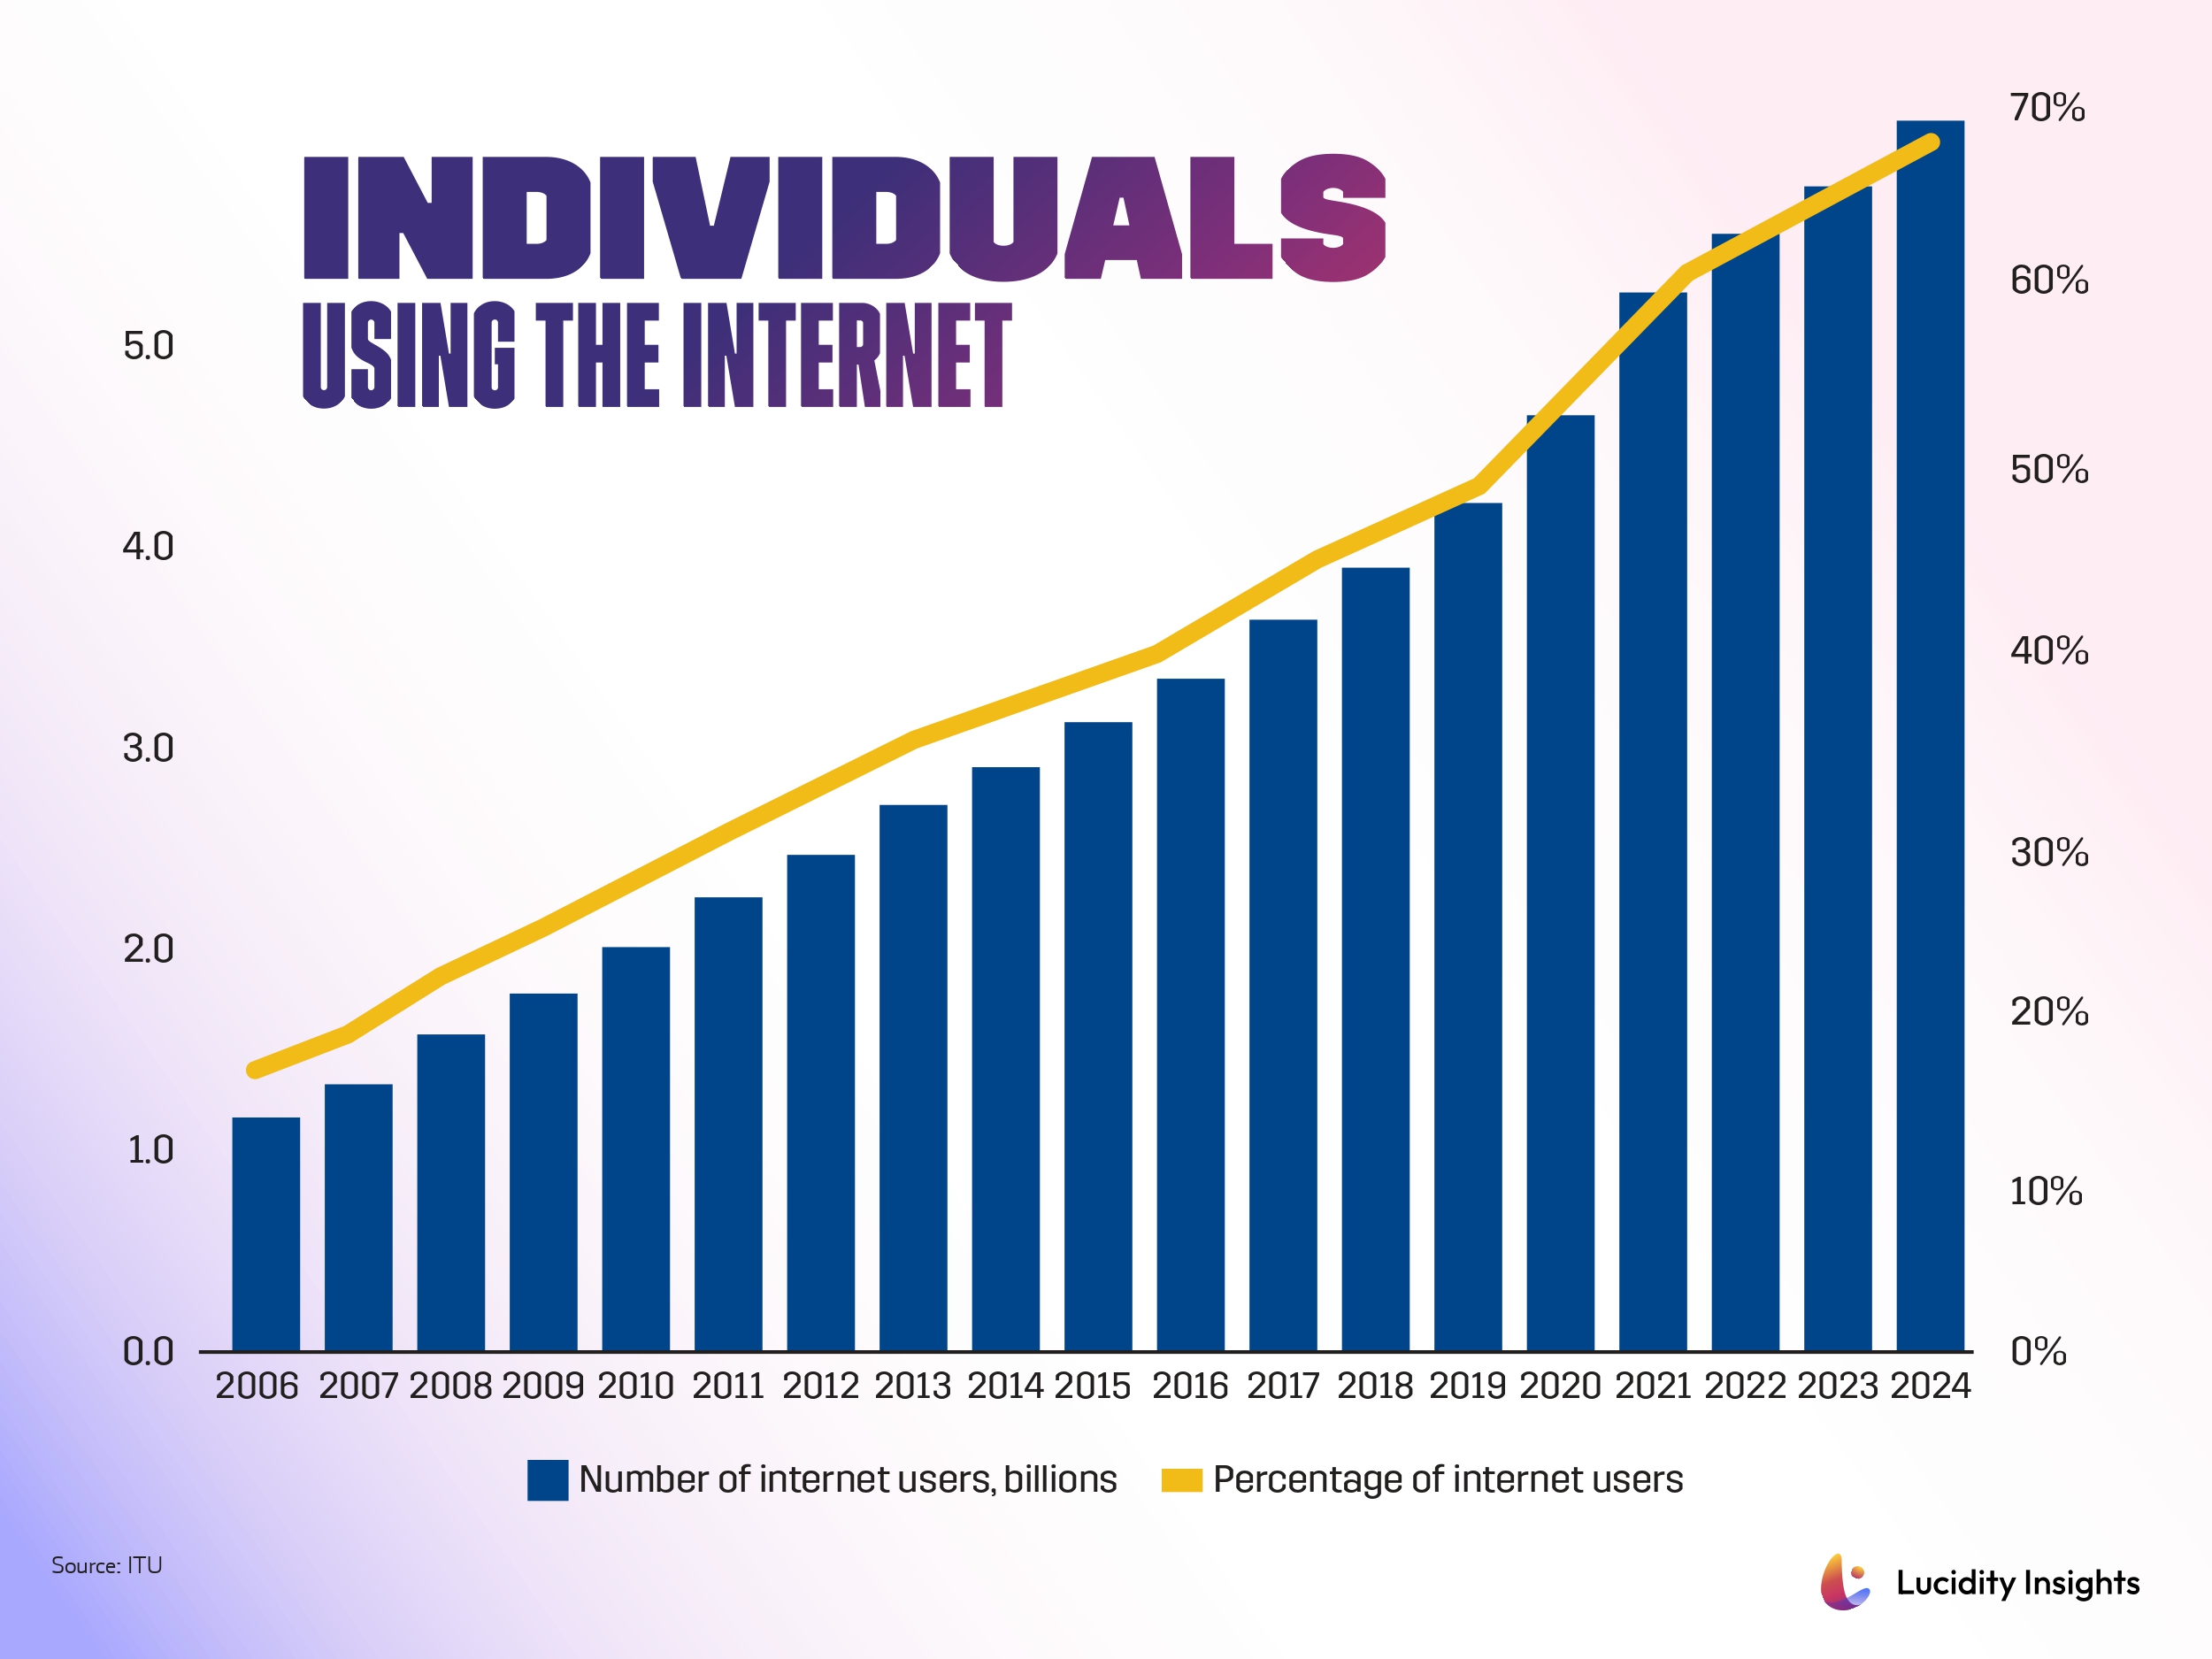 Individuals using the Internet